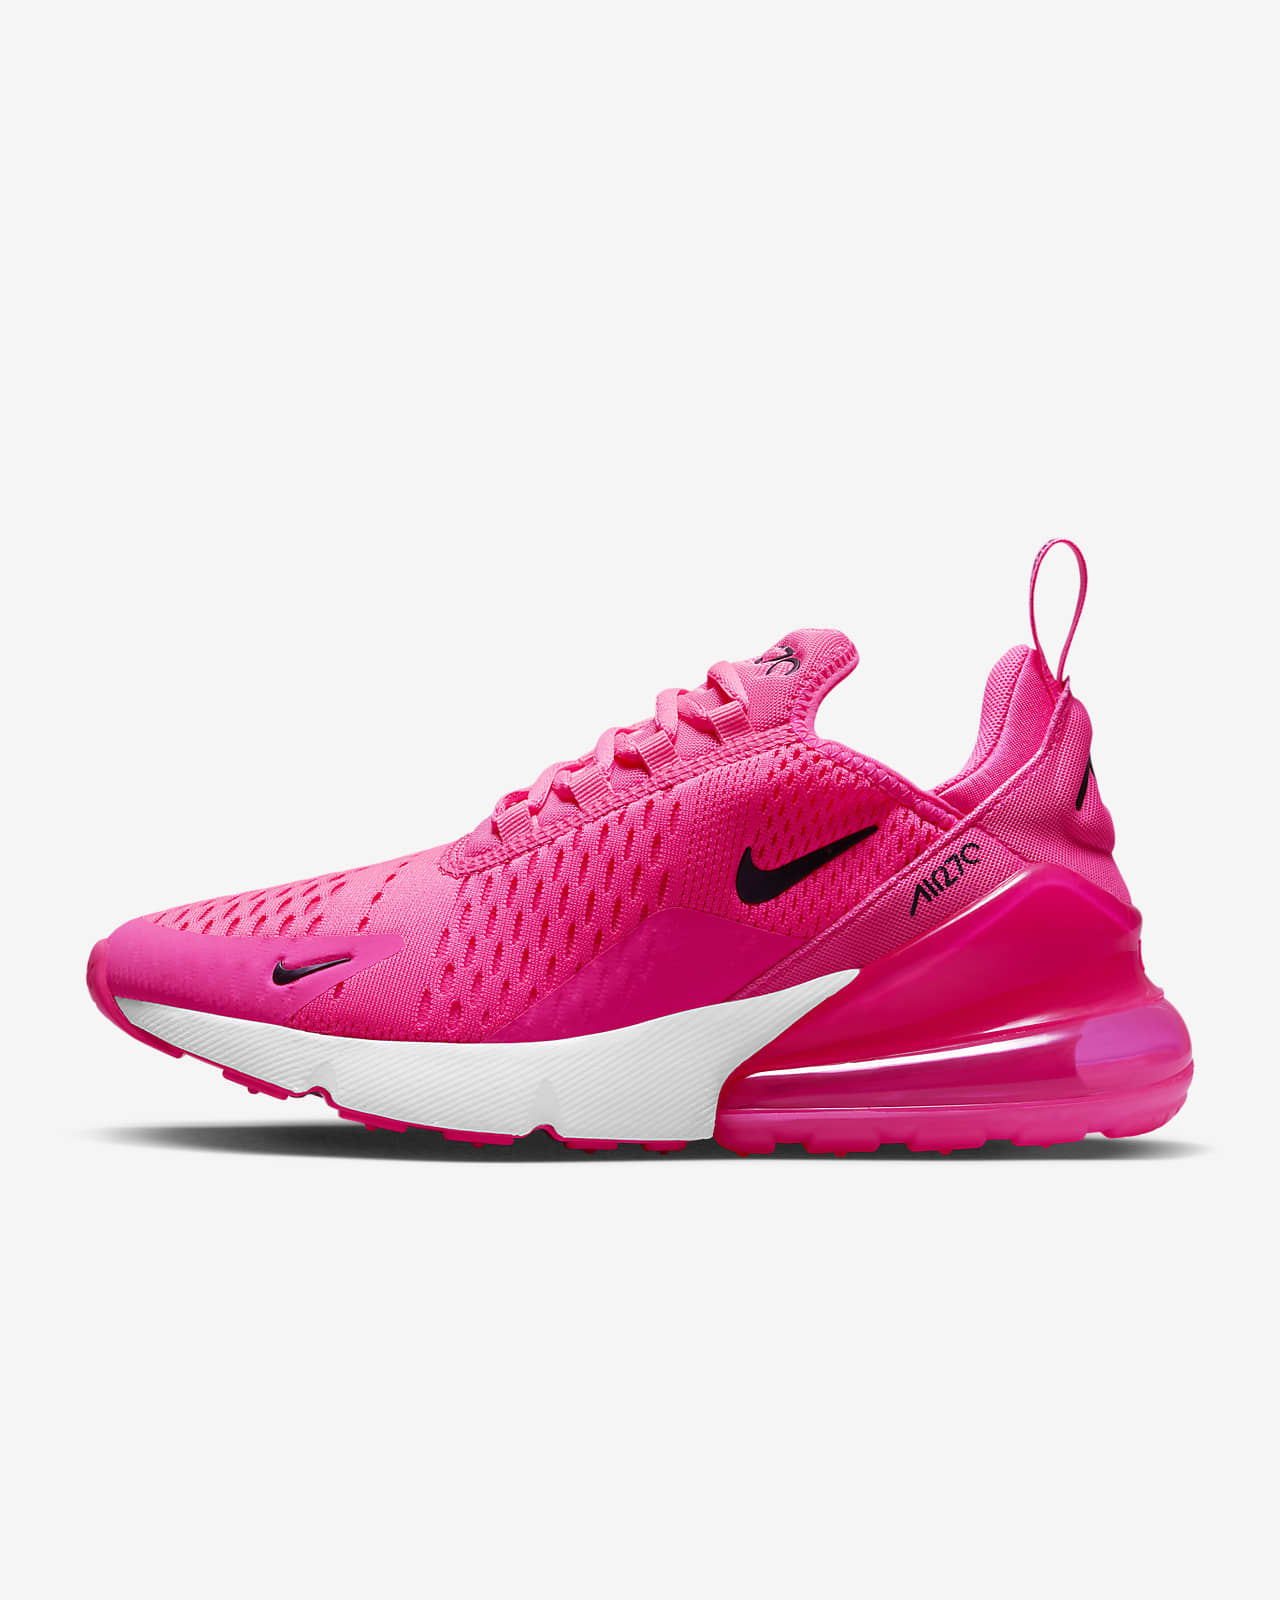 Get married Alternative proposal Abstraction Nike Air Max 270 Women's Shoes. Nike AU